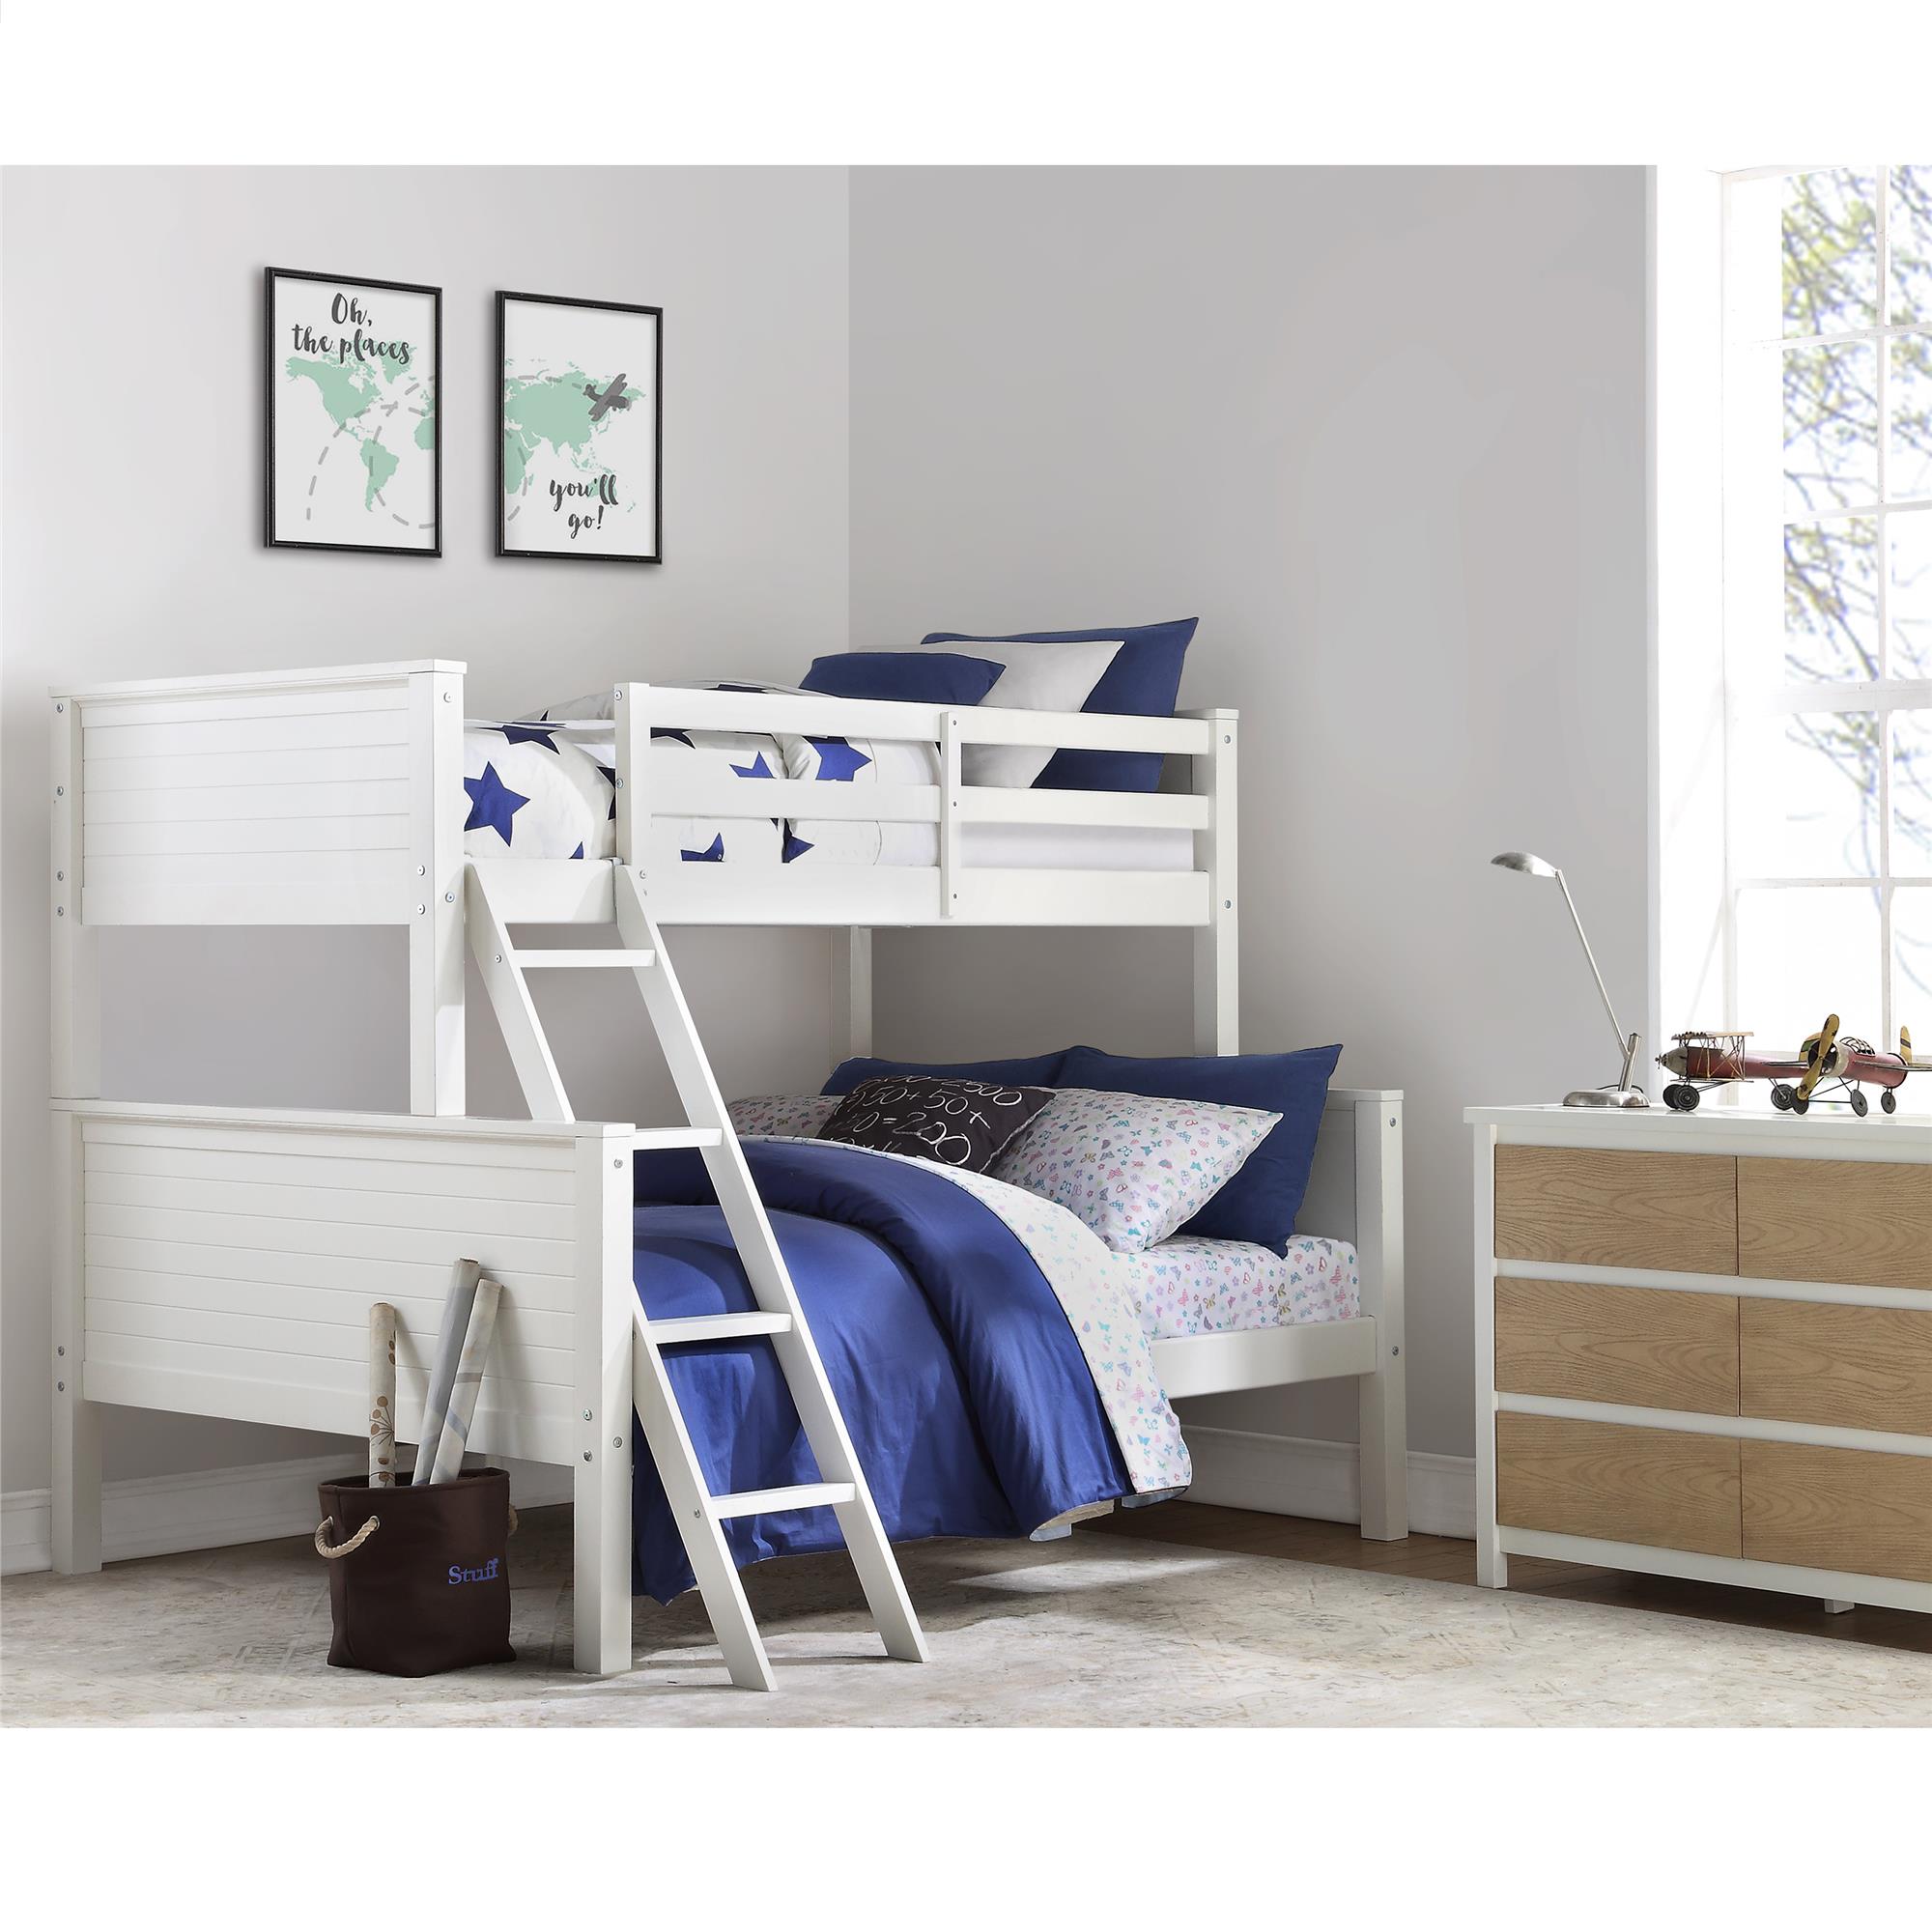 Mainstays Premium Twin Over Full Bunk Bed, Mainstays Premium Twin Over Full Bunk Bed Multiple Colors